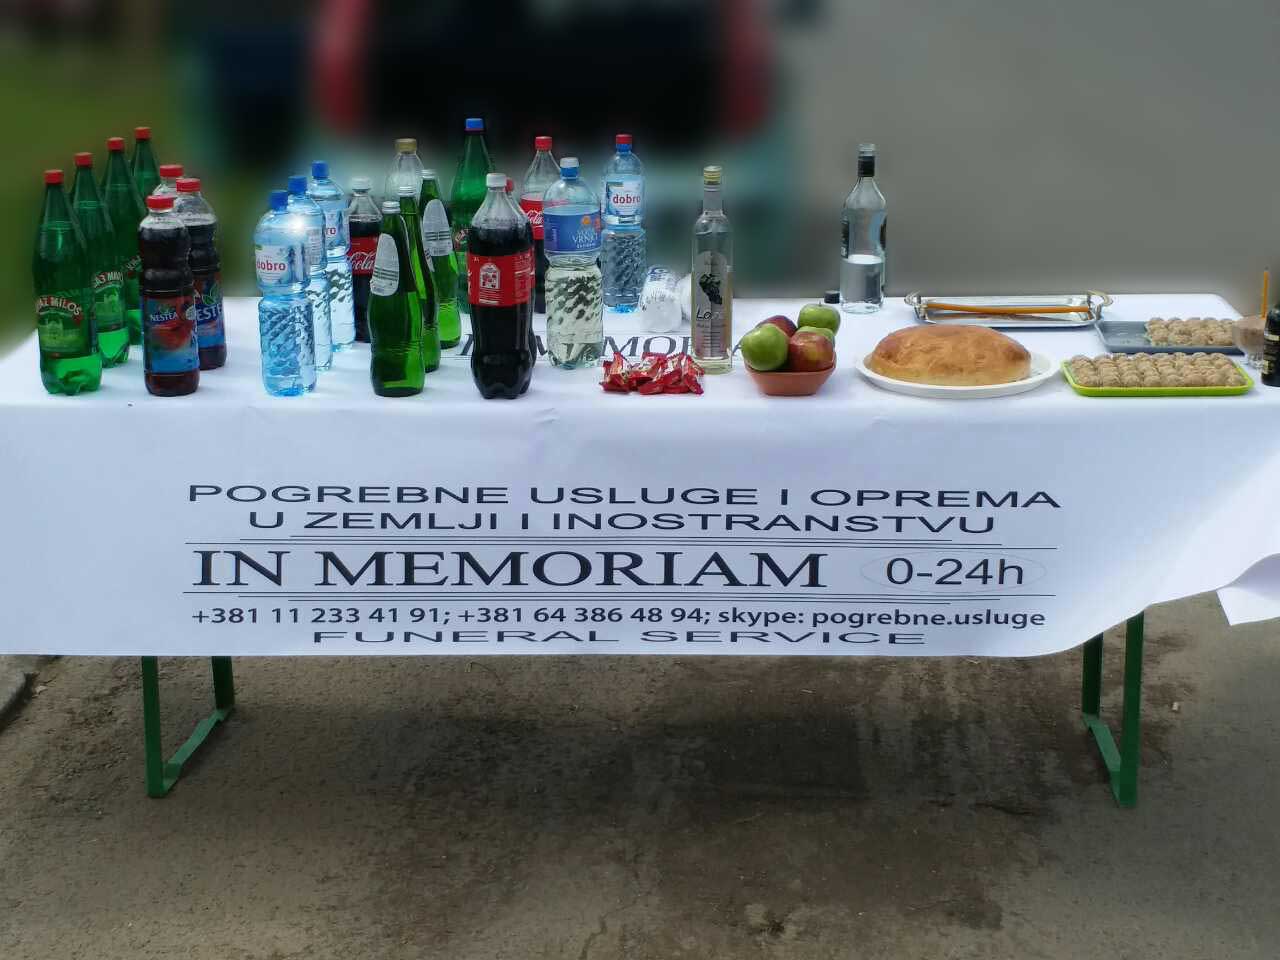 Refreshments at the cemetery